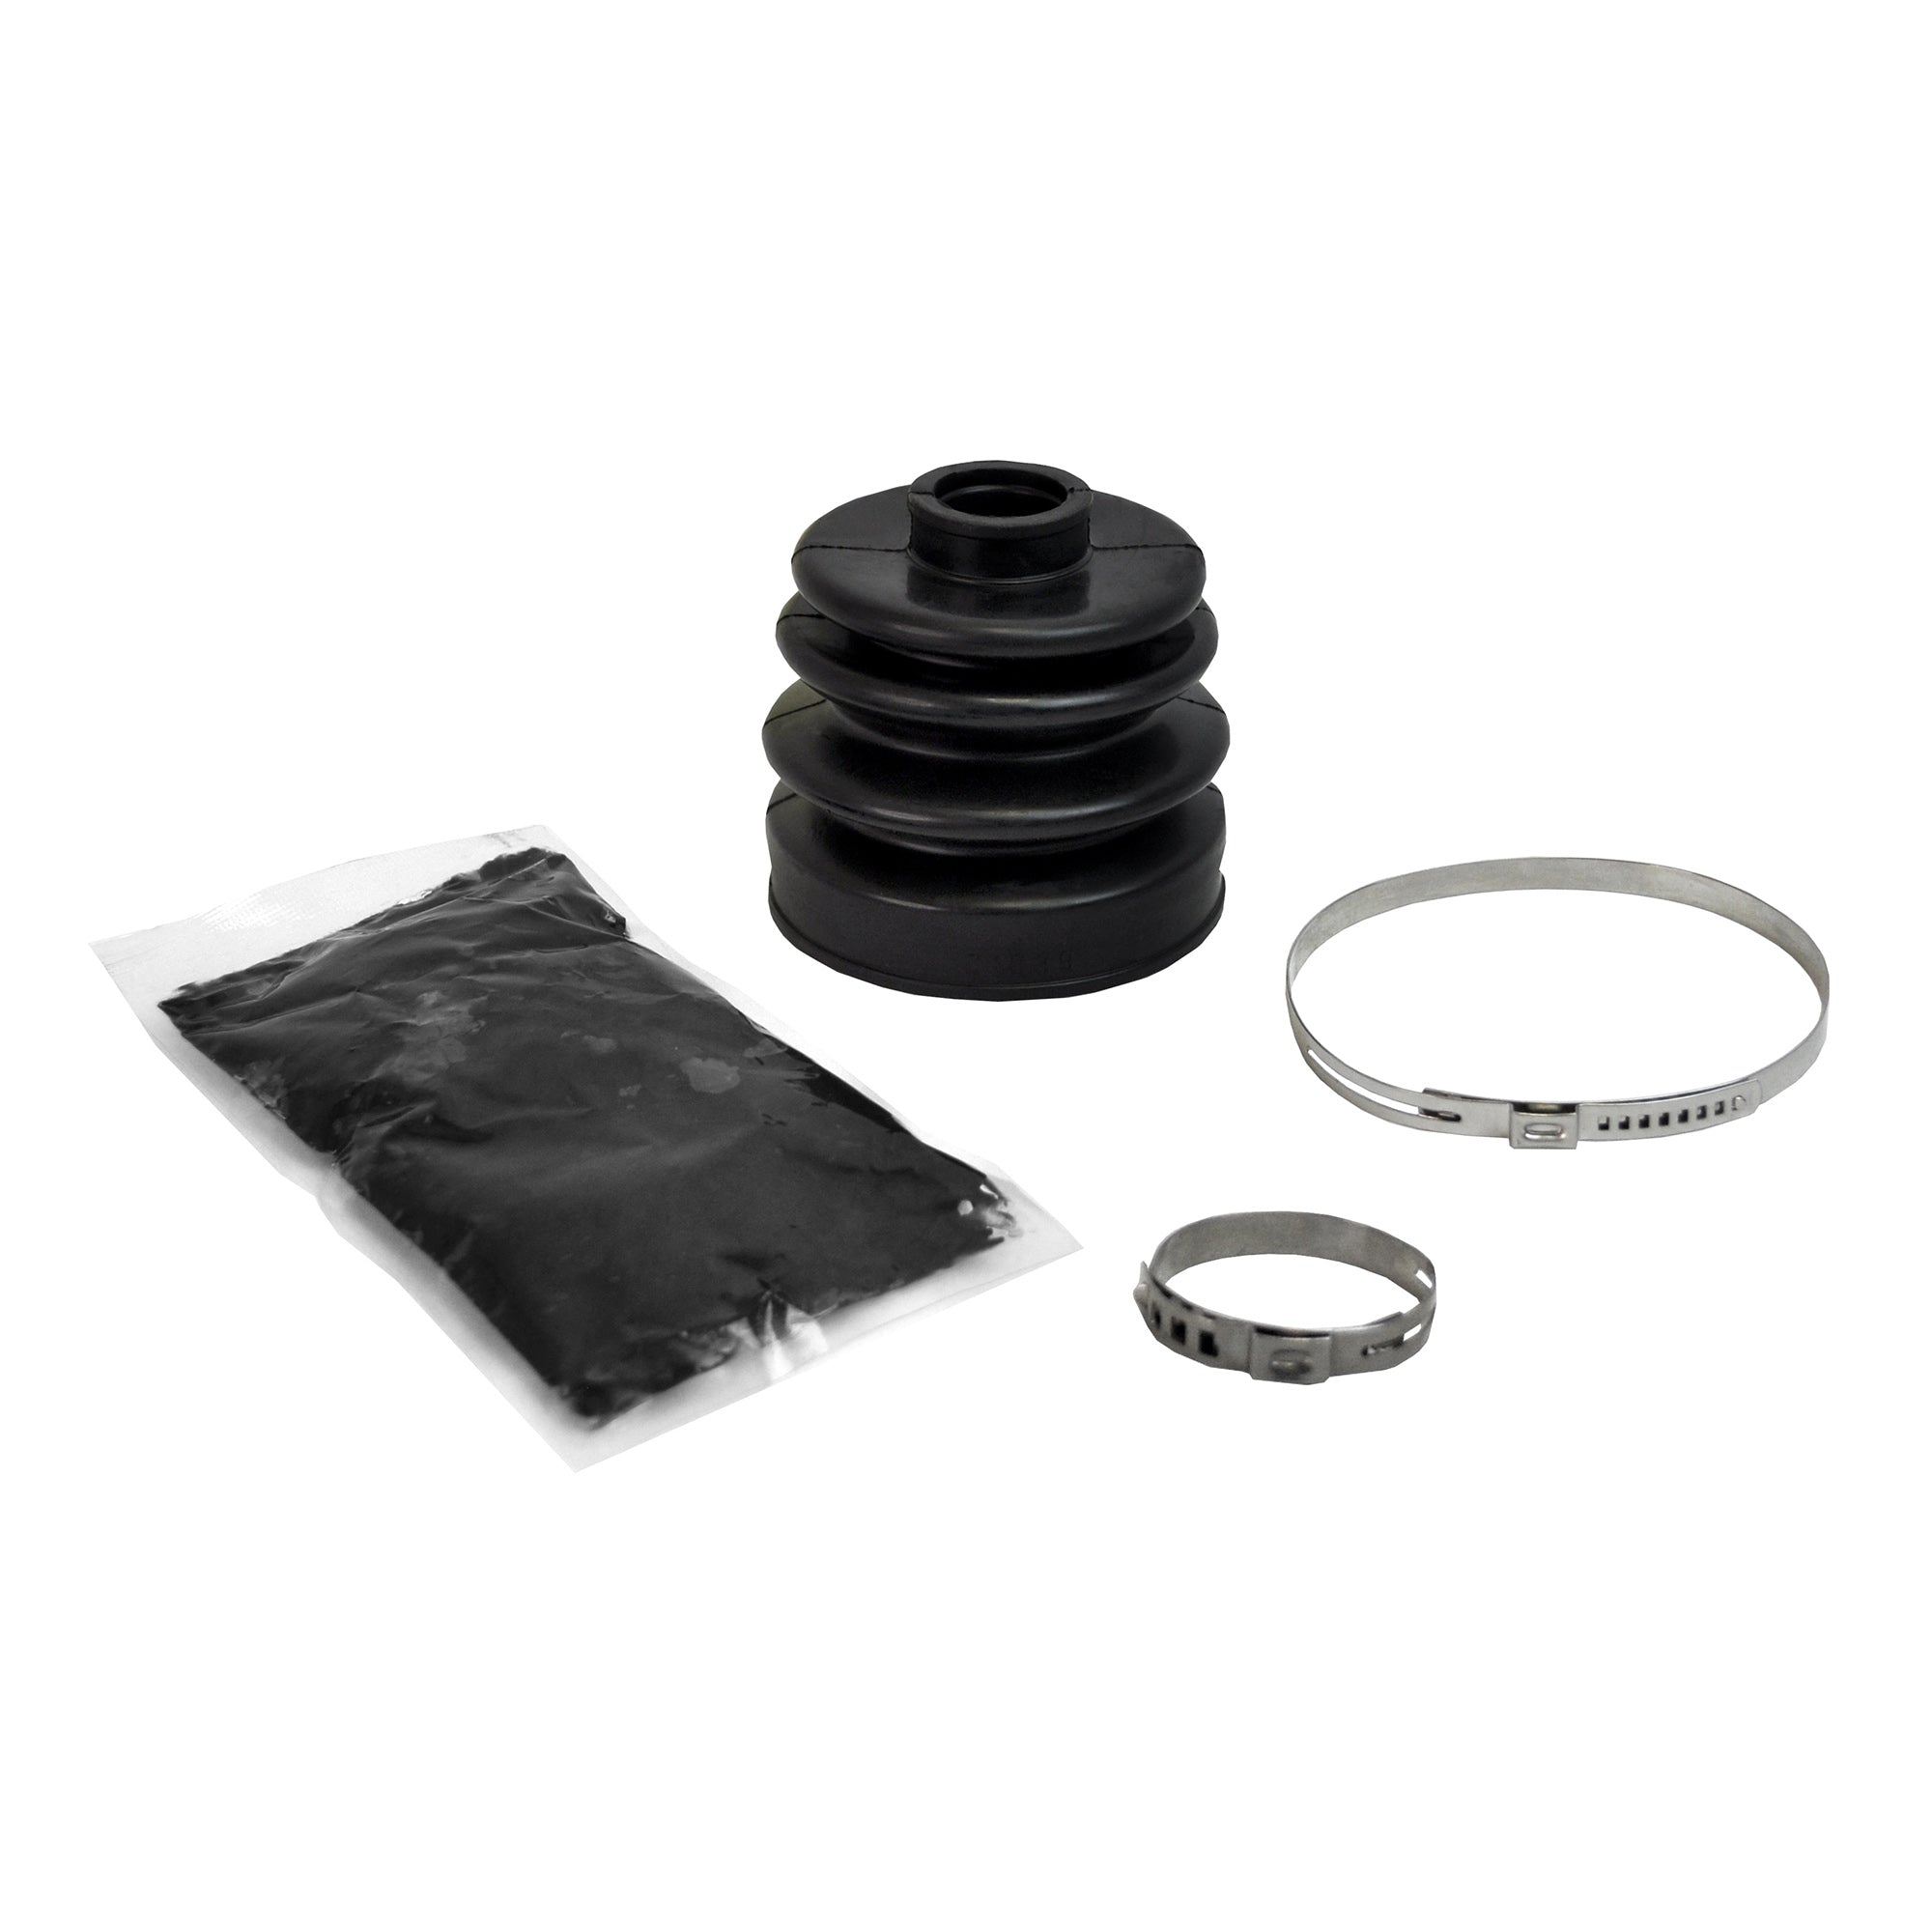 Polaris ACE 900 Rugged OE Replacement Boot Kit